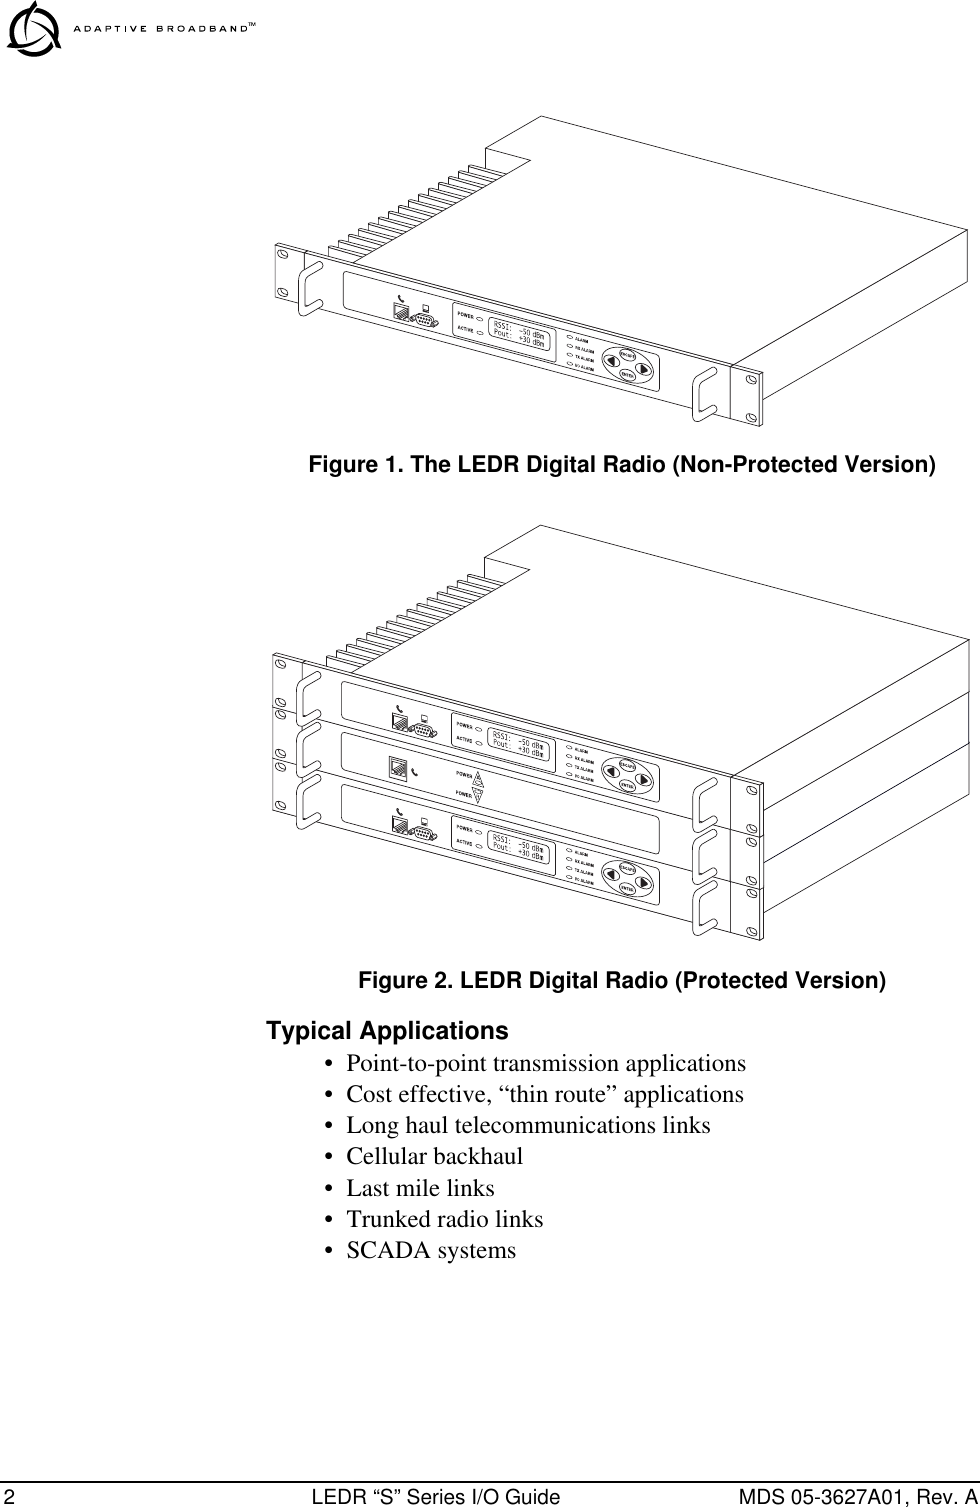  2 LEDR “S” Series I/O Guide MDS 05-3627A01, Rev. A Invisible place holder Figure 1. The LEDR Digital Radio (Non-Protected Version) Invisible place holder Figure 2. LEDR Digital Radio (Protected Version) Typical Applications • Point-to-point transmission applications• Cost effective, “thin route” applications• Long haul telecommunications links• Cellular backhaul• Last mile links• Trunked radio links• SCADA systems